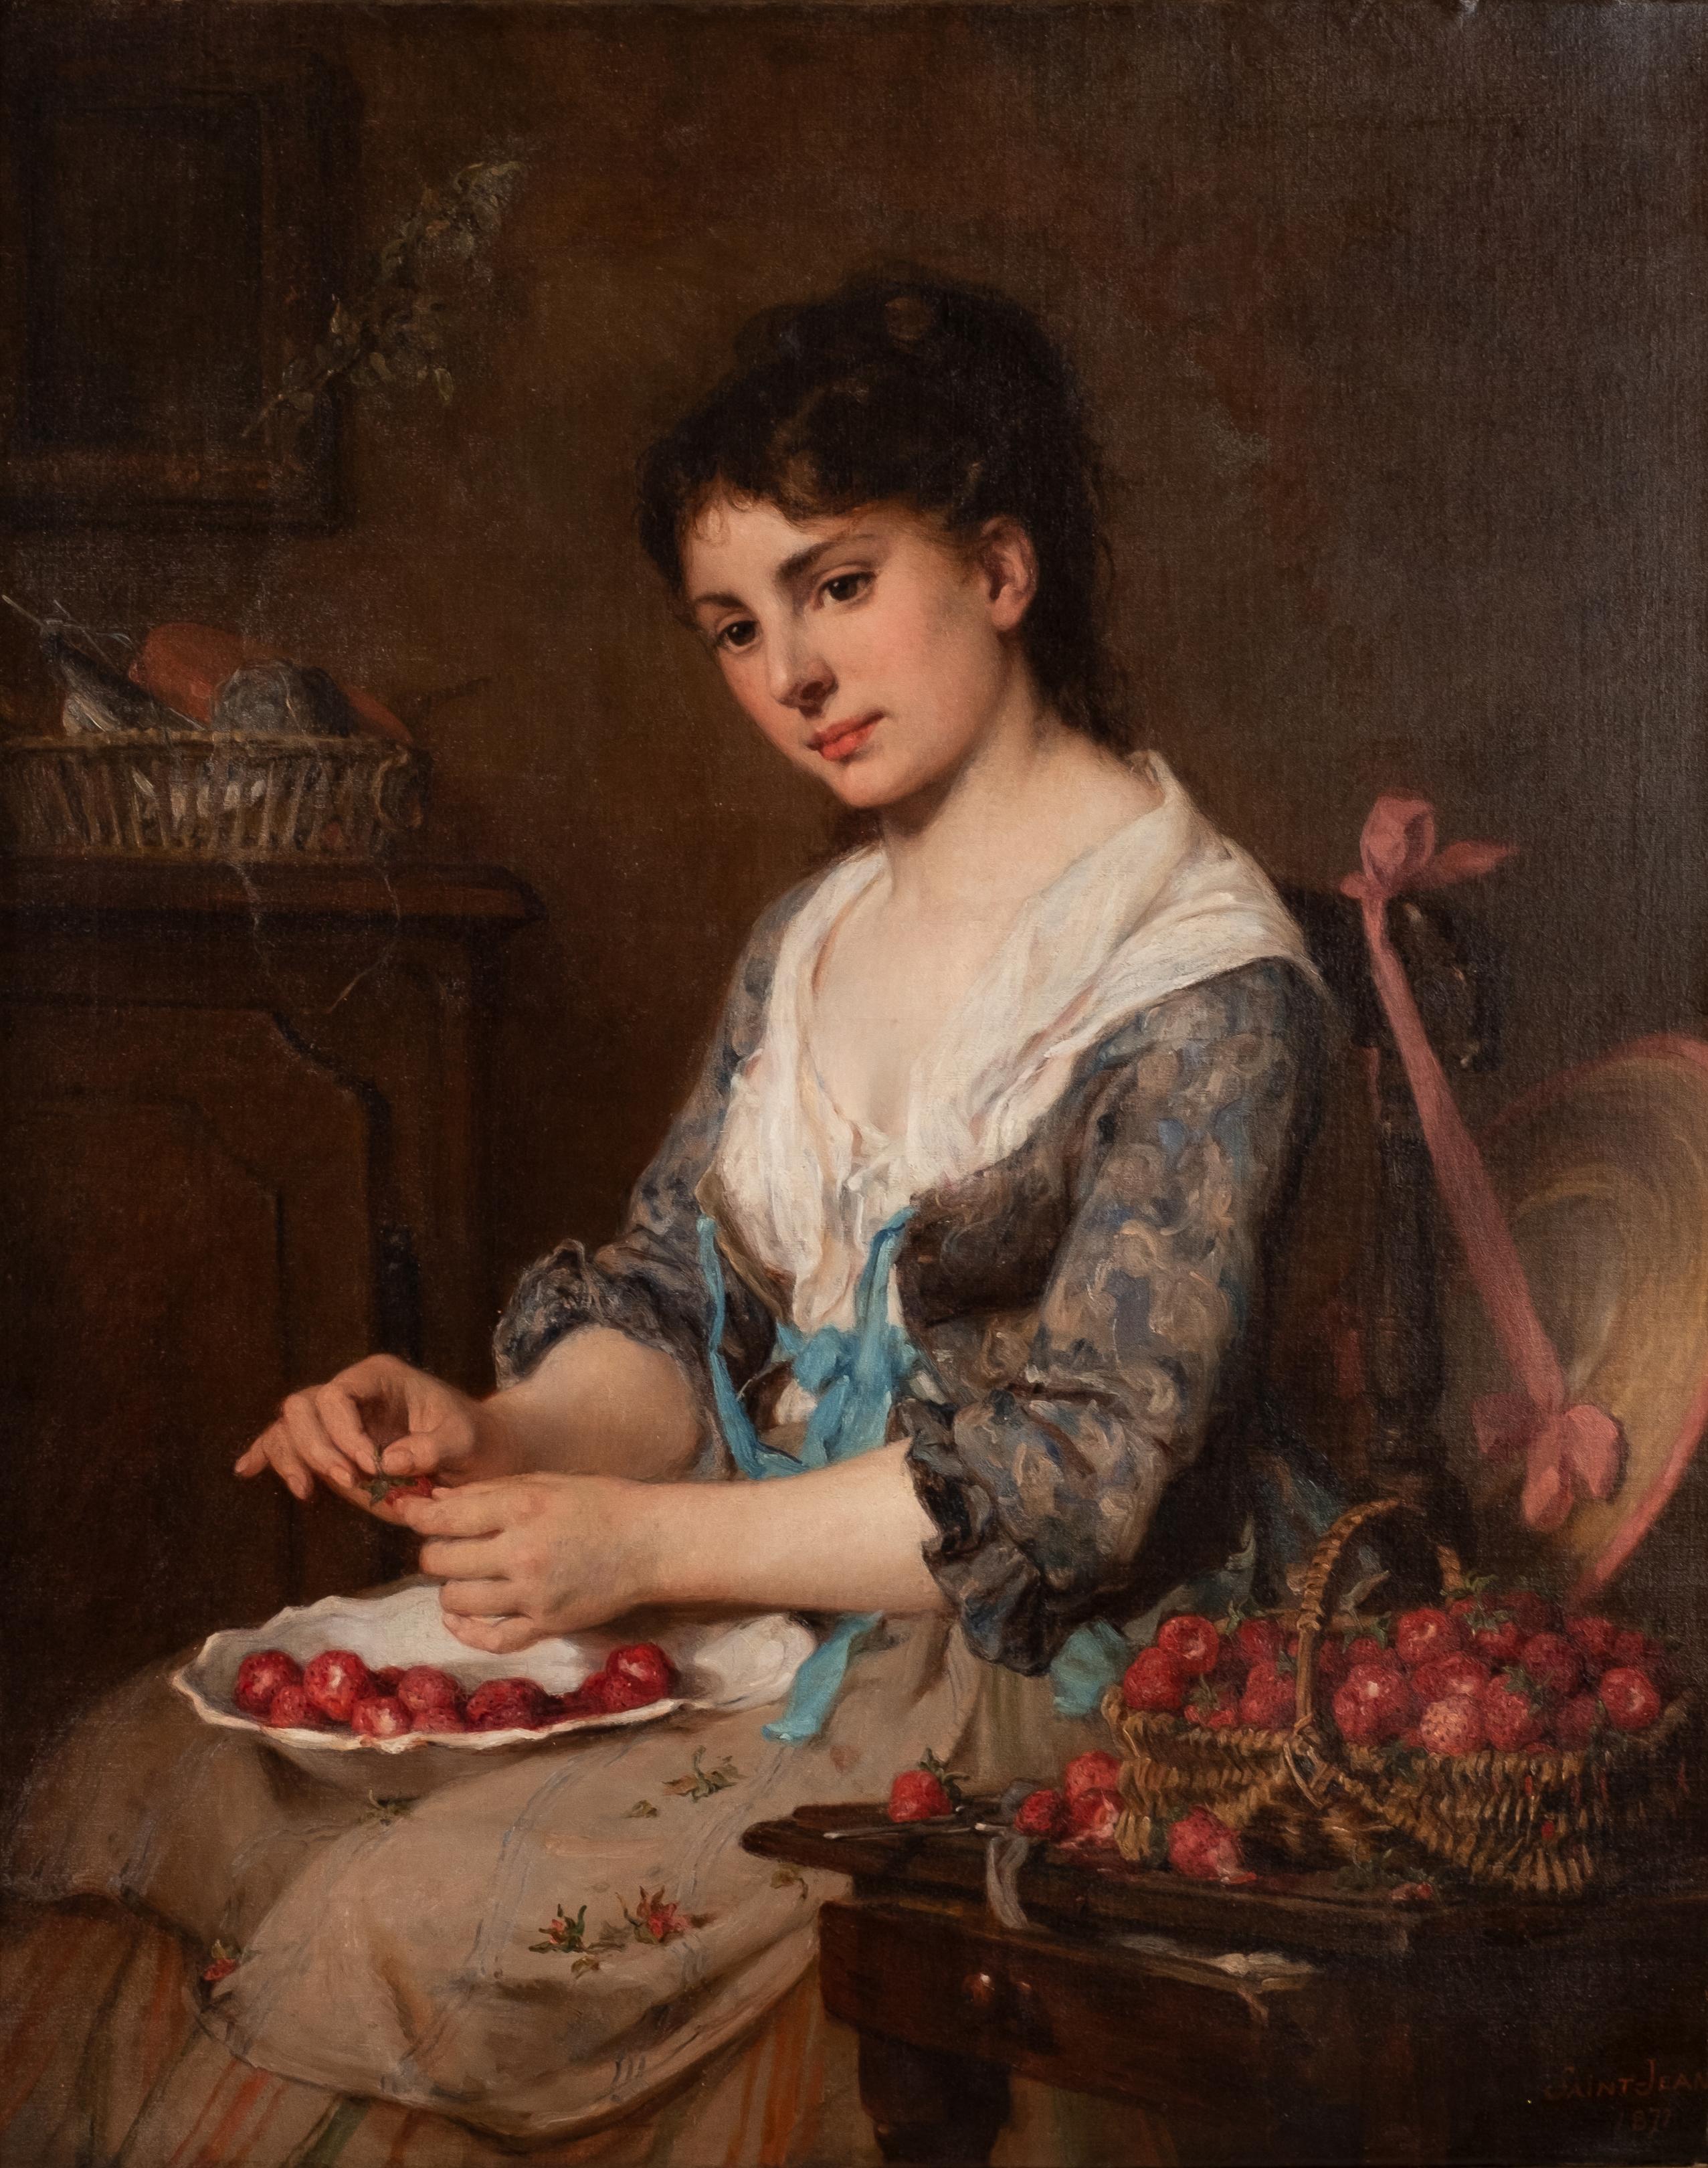 Young French Girl with Strawberries - Painting by Paul Saint-Jean